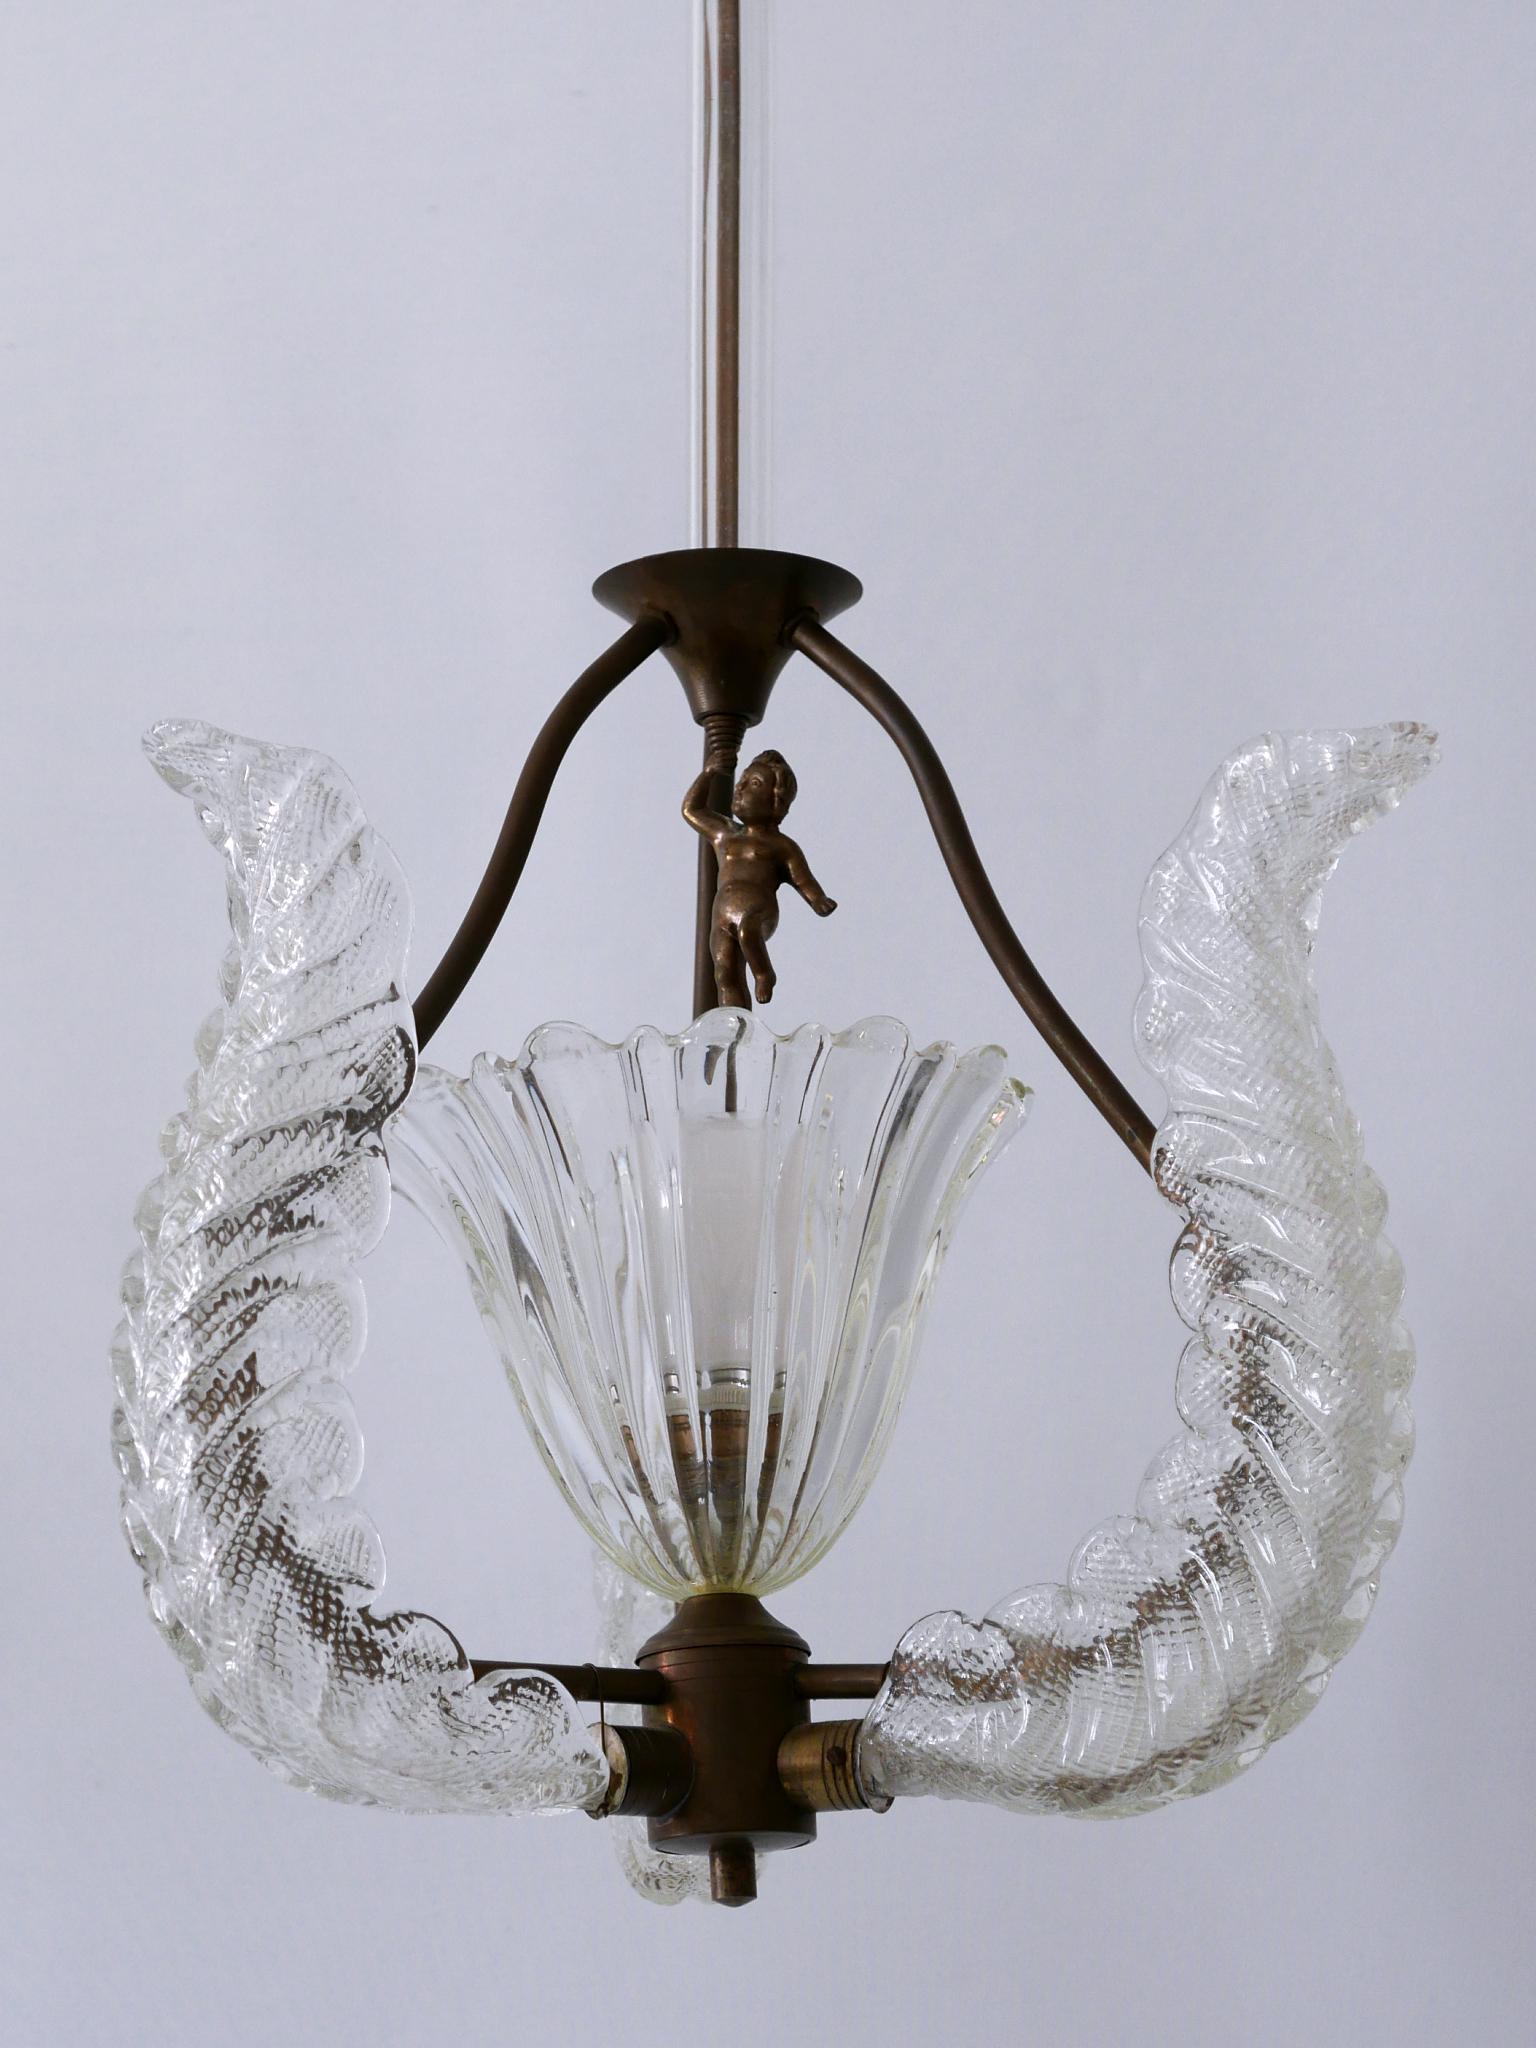 Italian Rare Mid Century Modern Chandelier or Pendant Lamp 'Putti' by Barovier & Toso For Sale